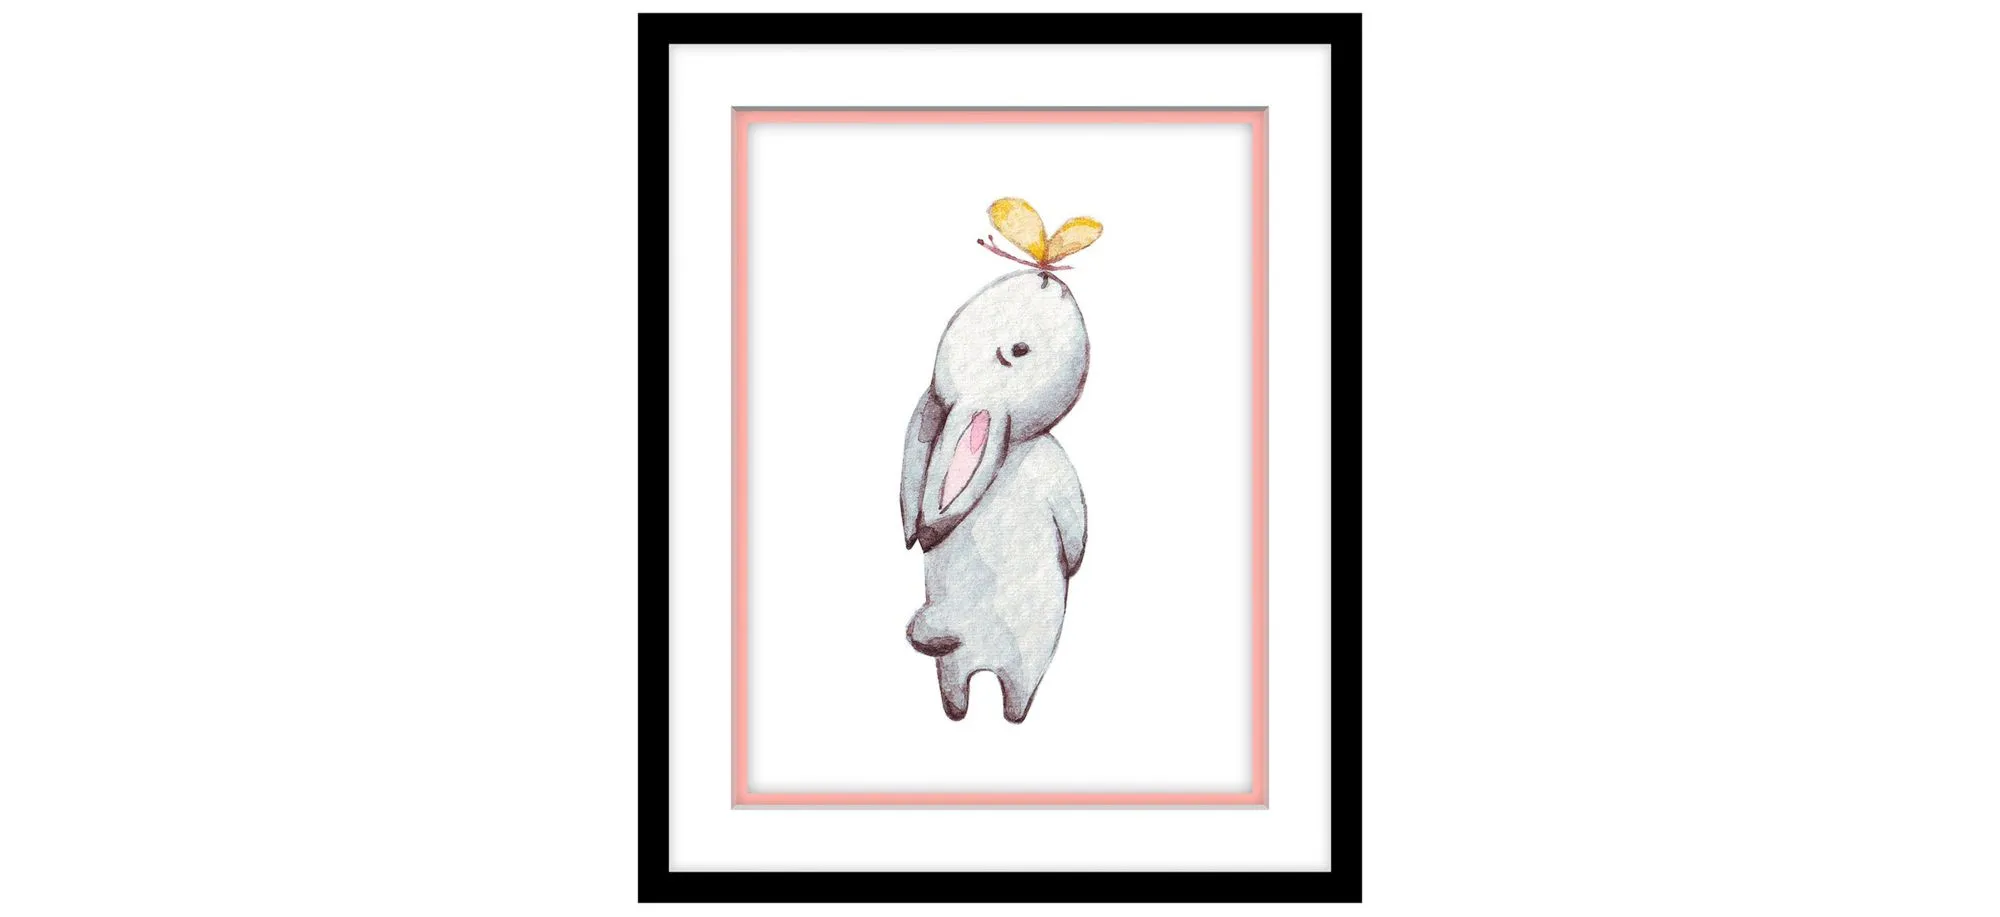 Small Bunny Big Dreams IV in Pink, White by Bellanest